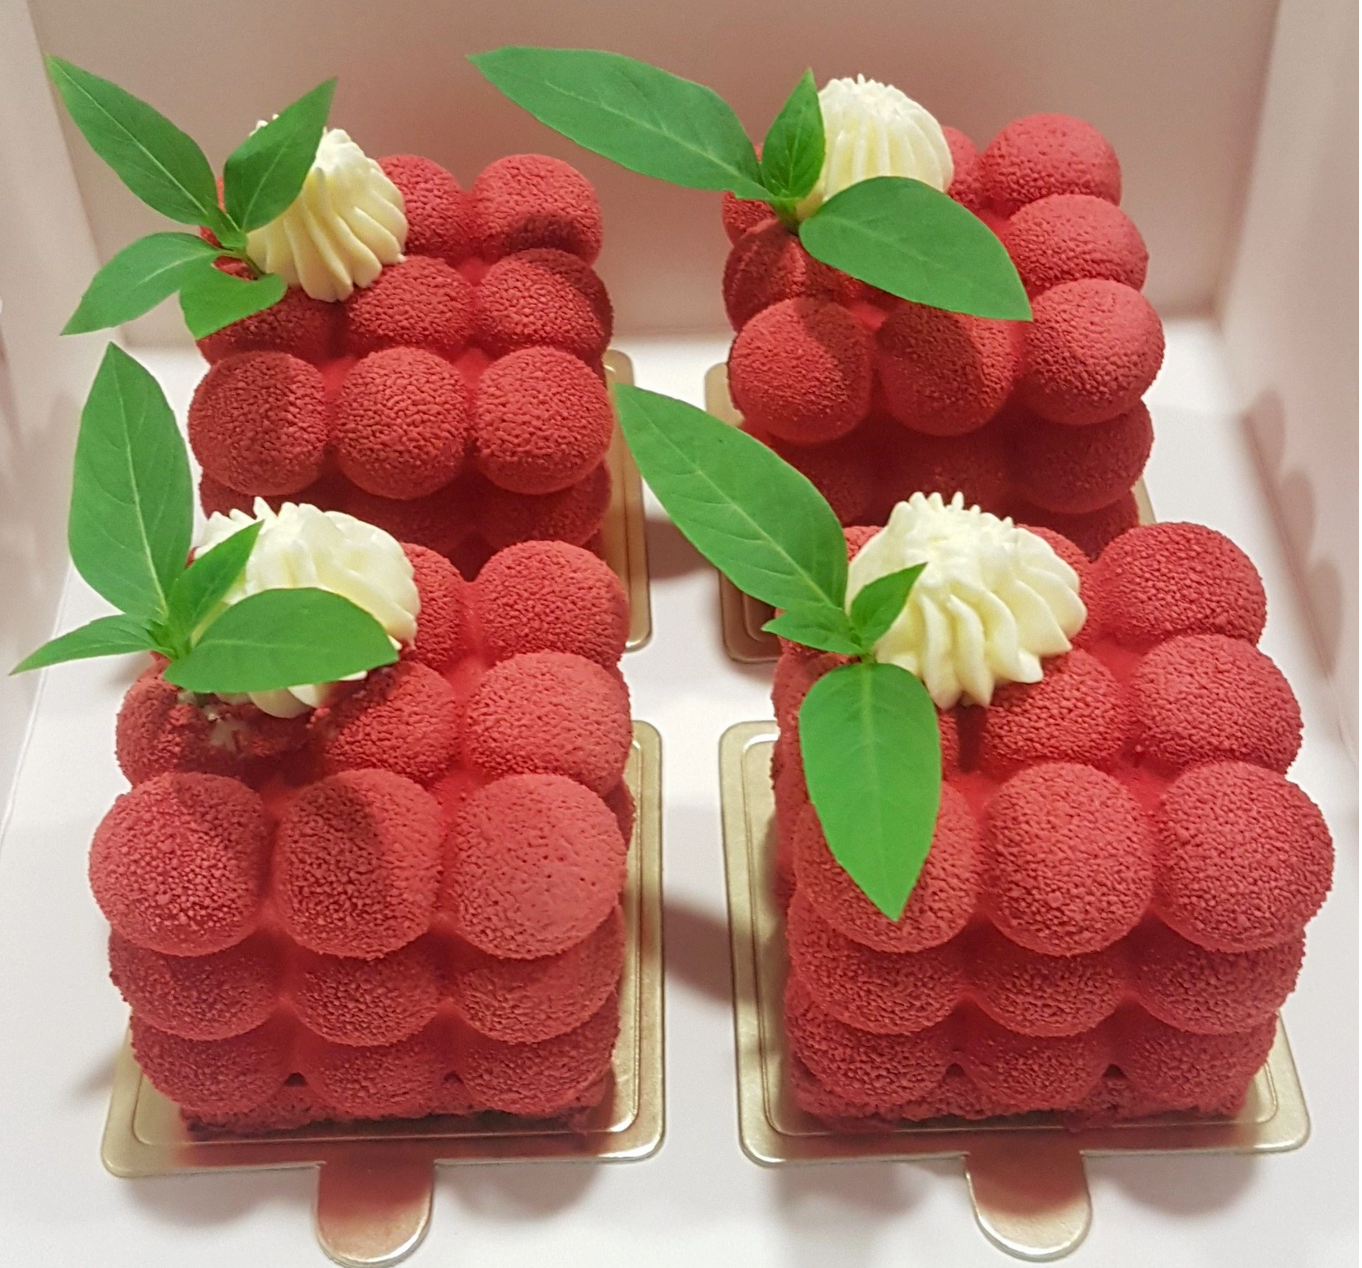 Strawberry Cube Cheese Gâteau